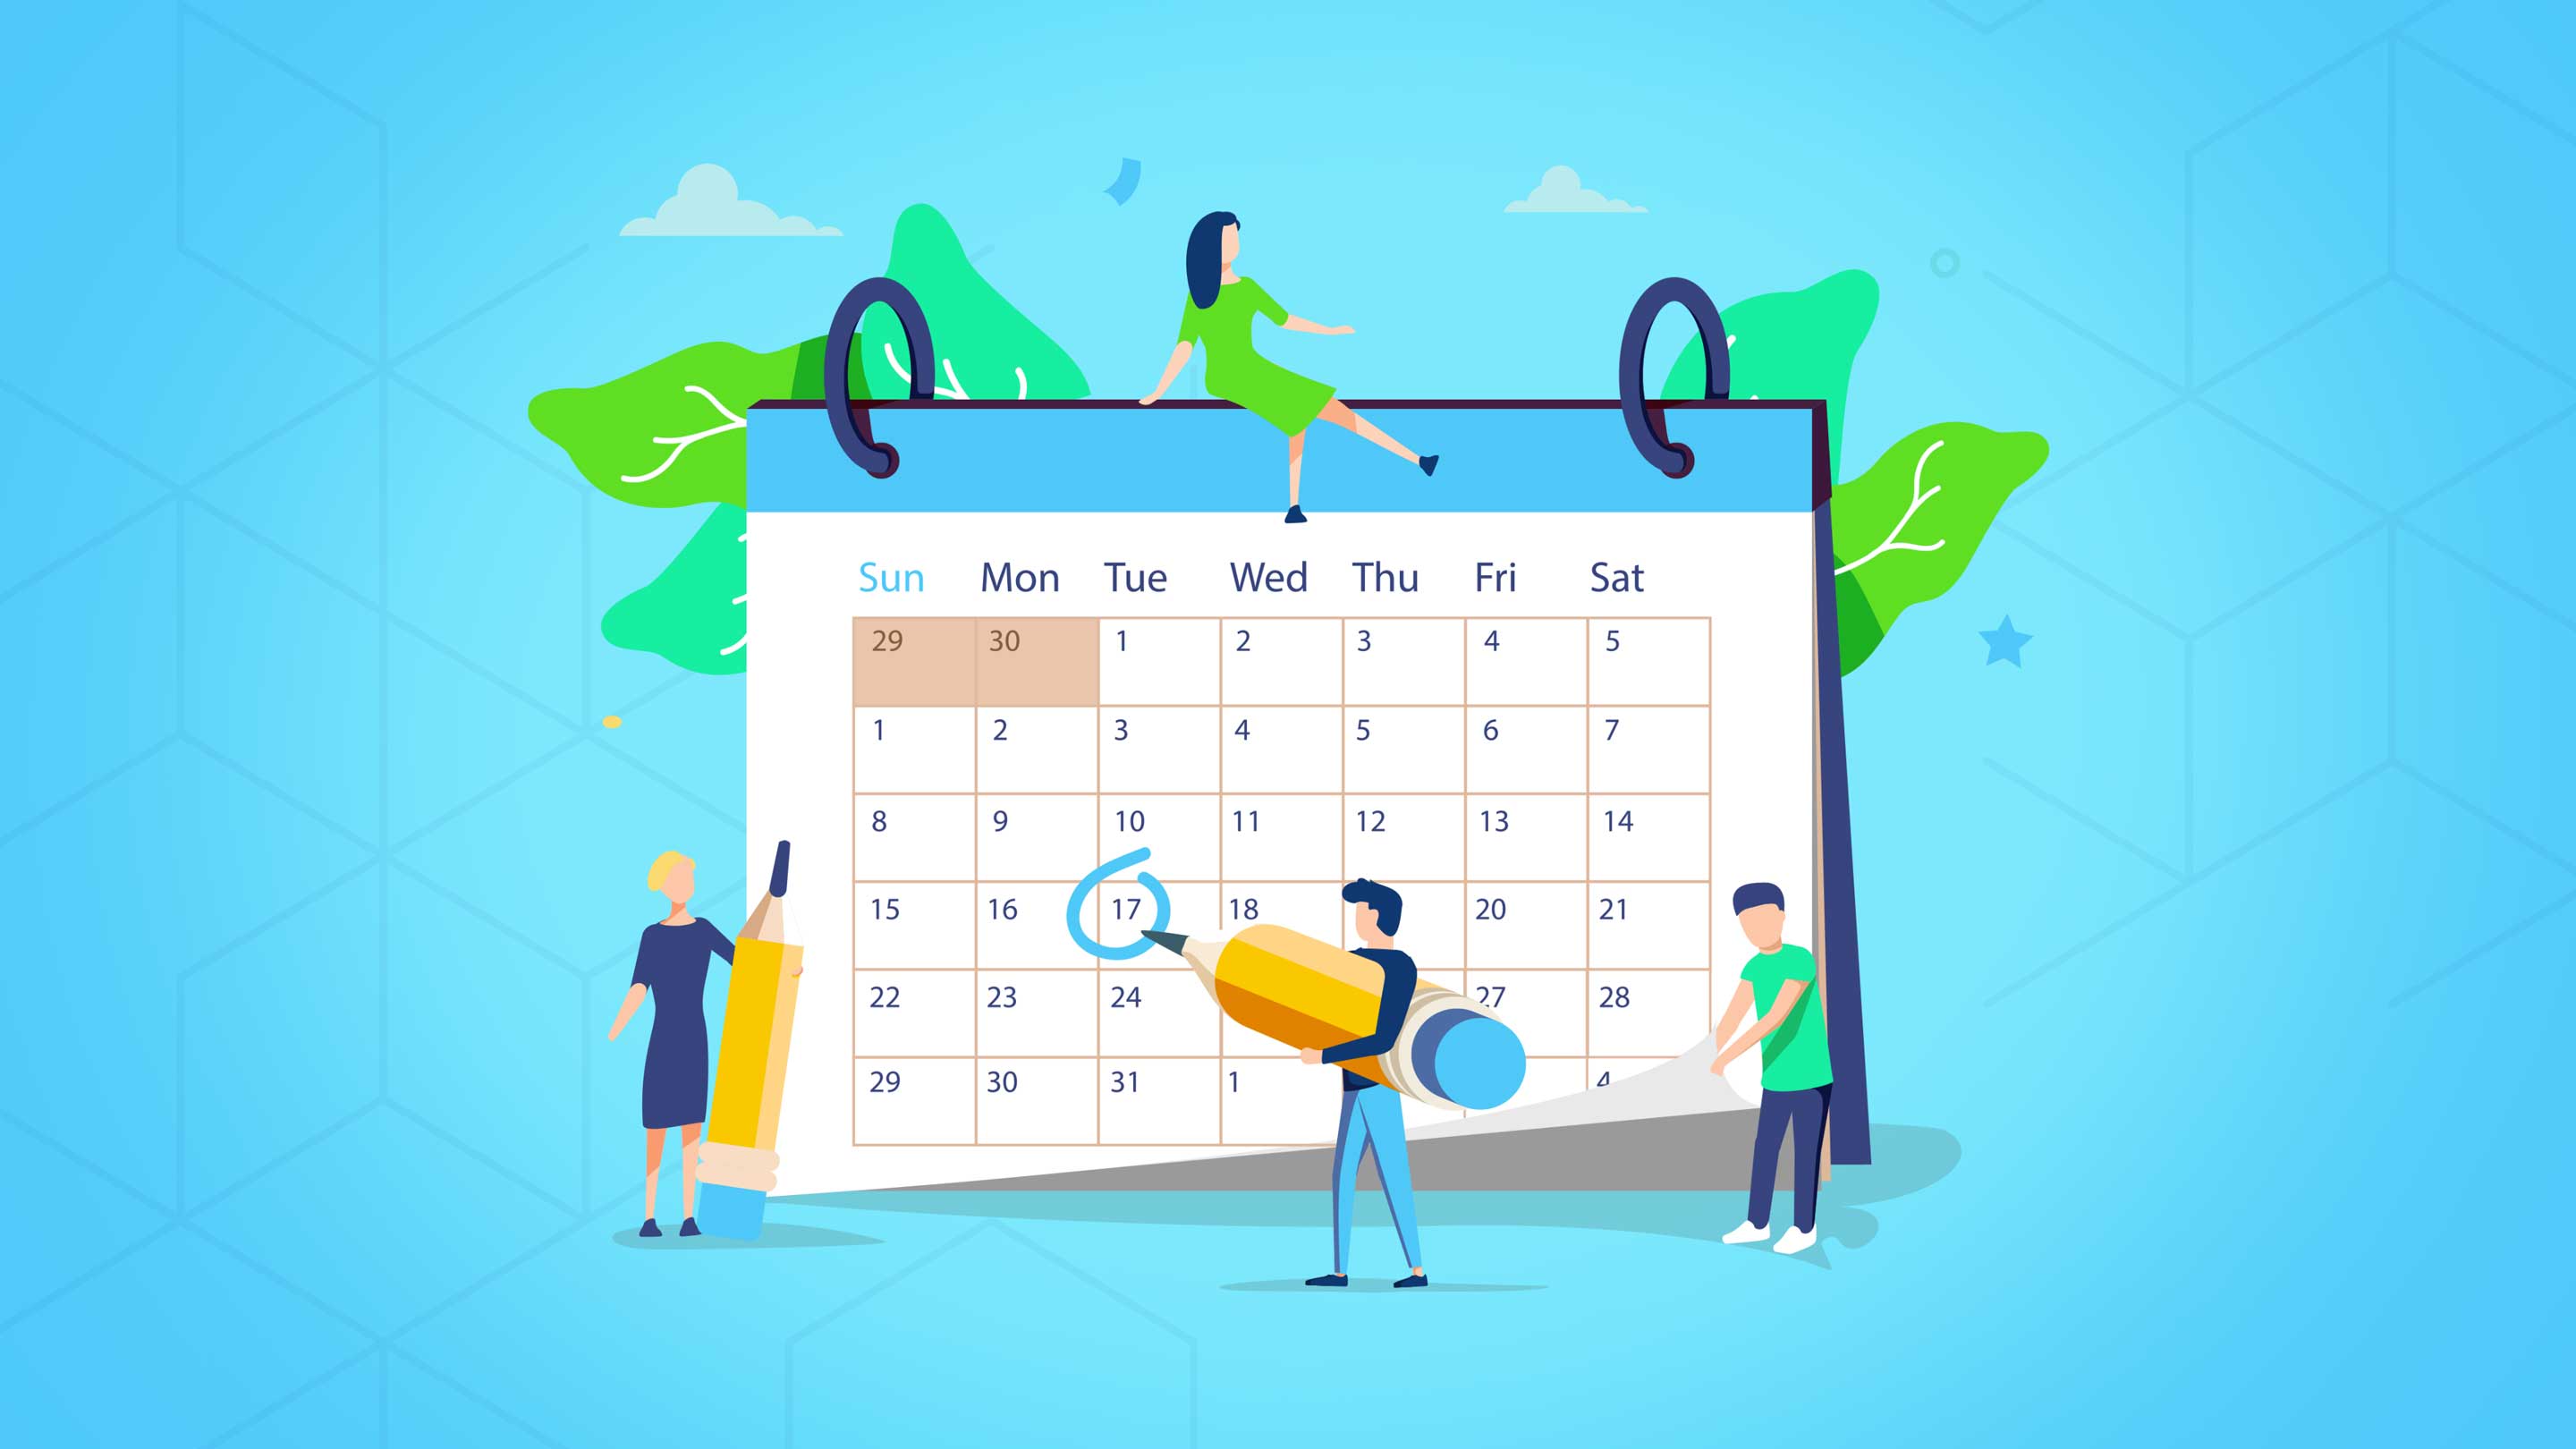 How to Plan an Event: Event Plan Steps, Tips and Checklist